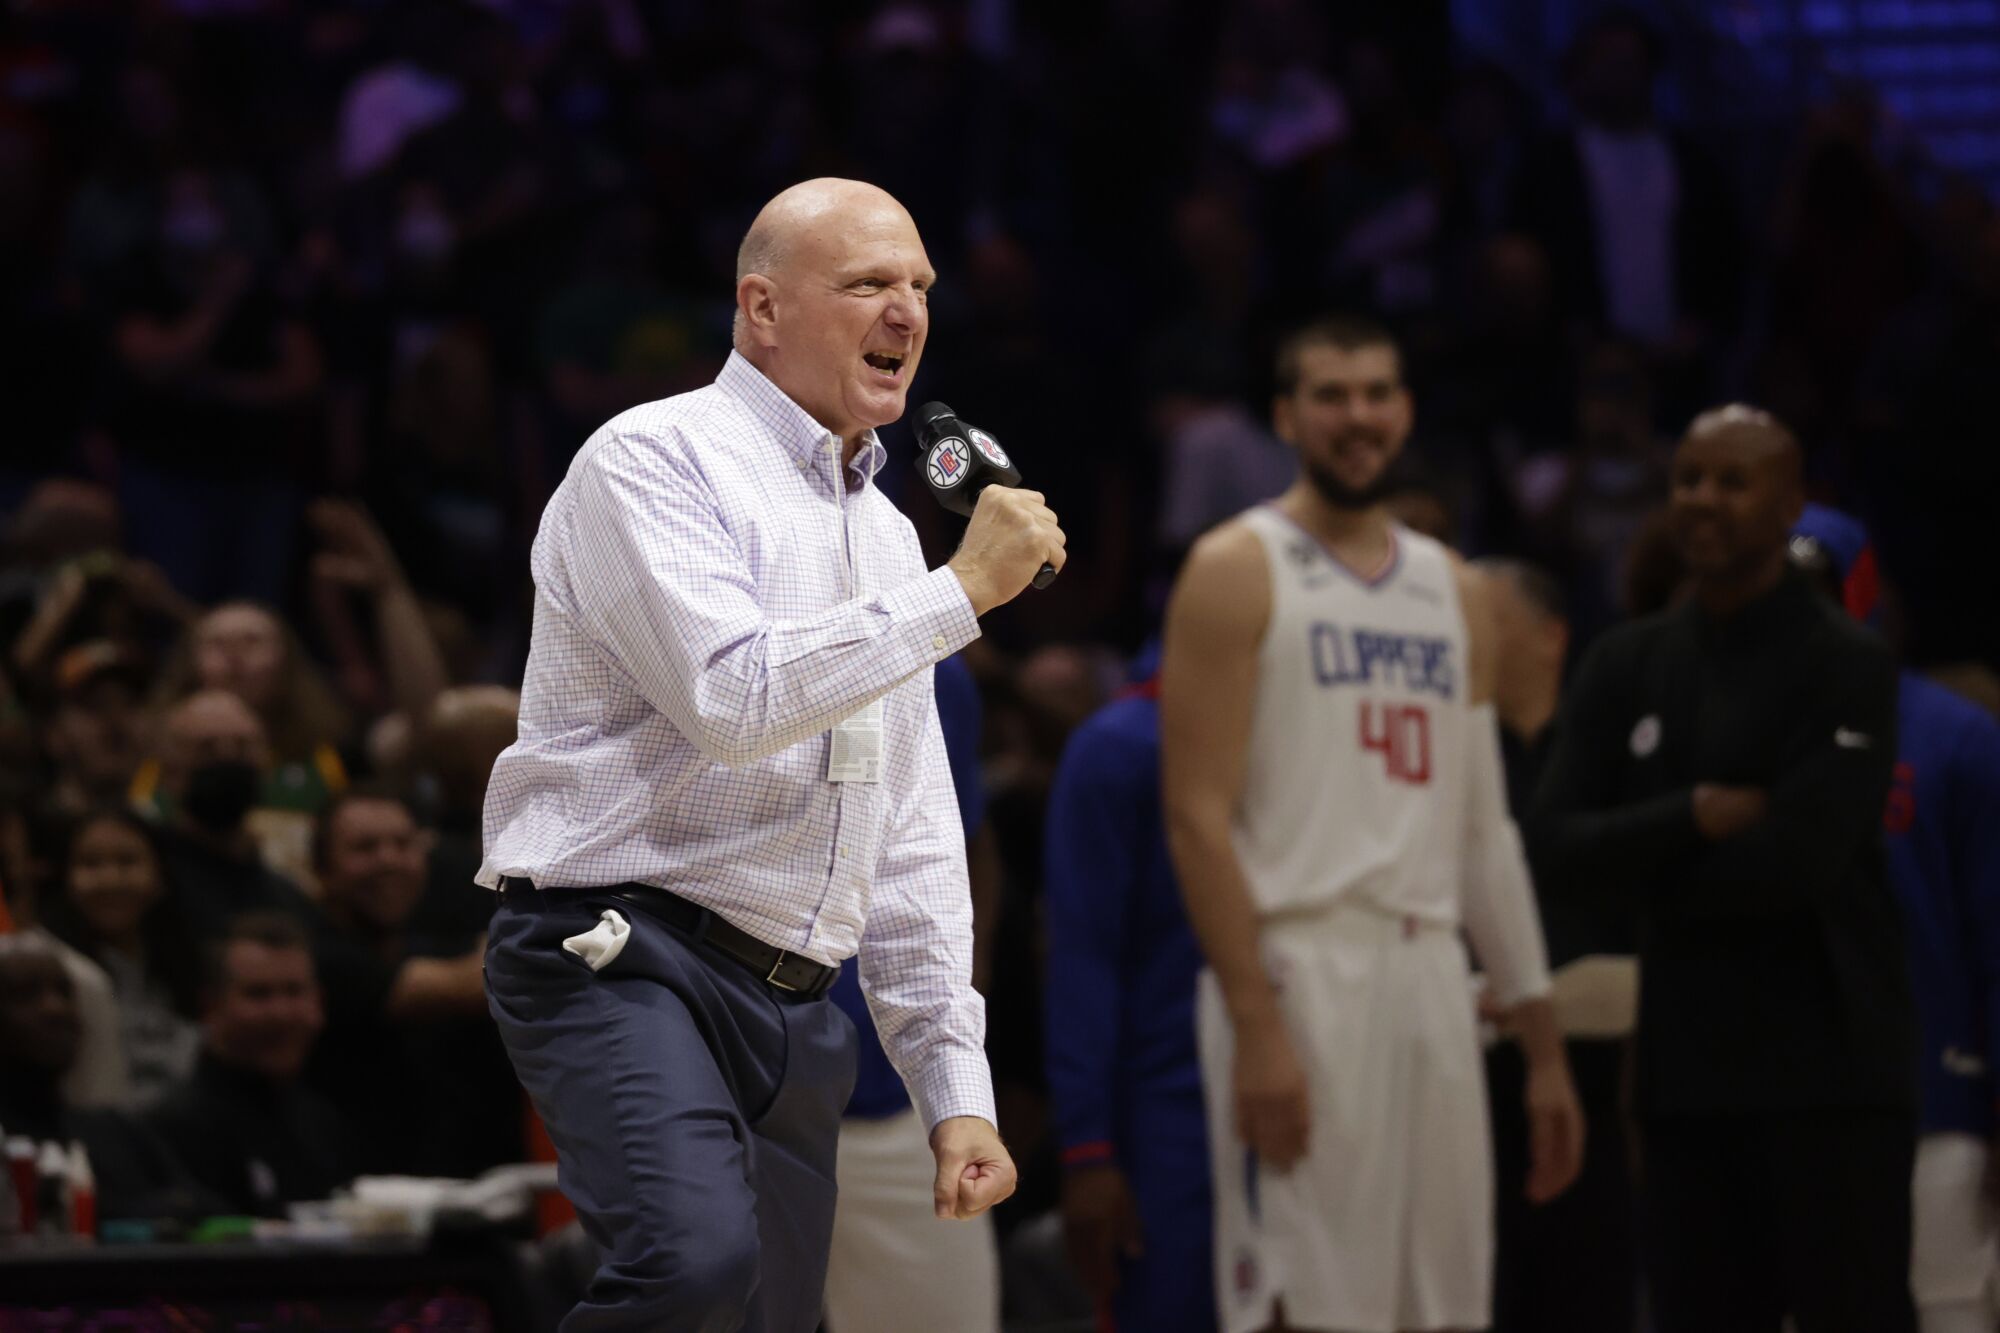 Clippers owner Steve Ballmer welcomes fans to a preseason NBA game in Seattle.